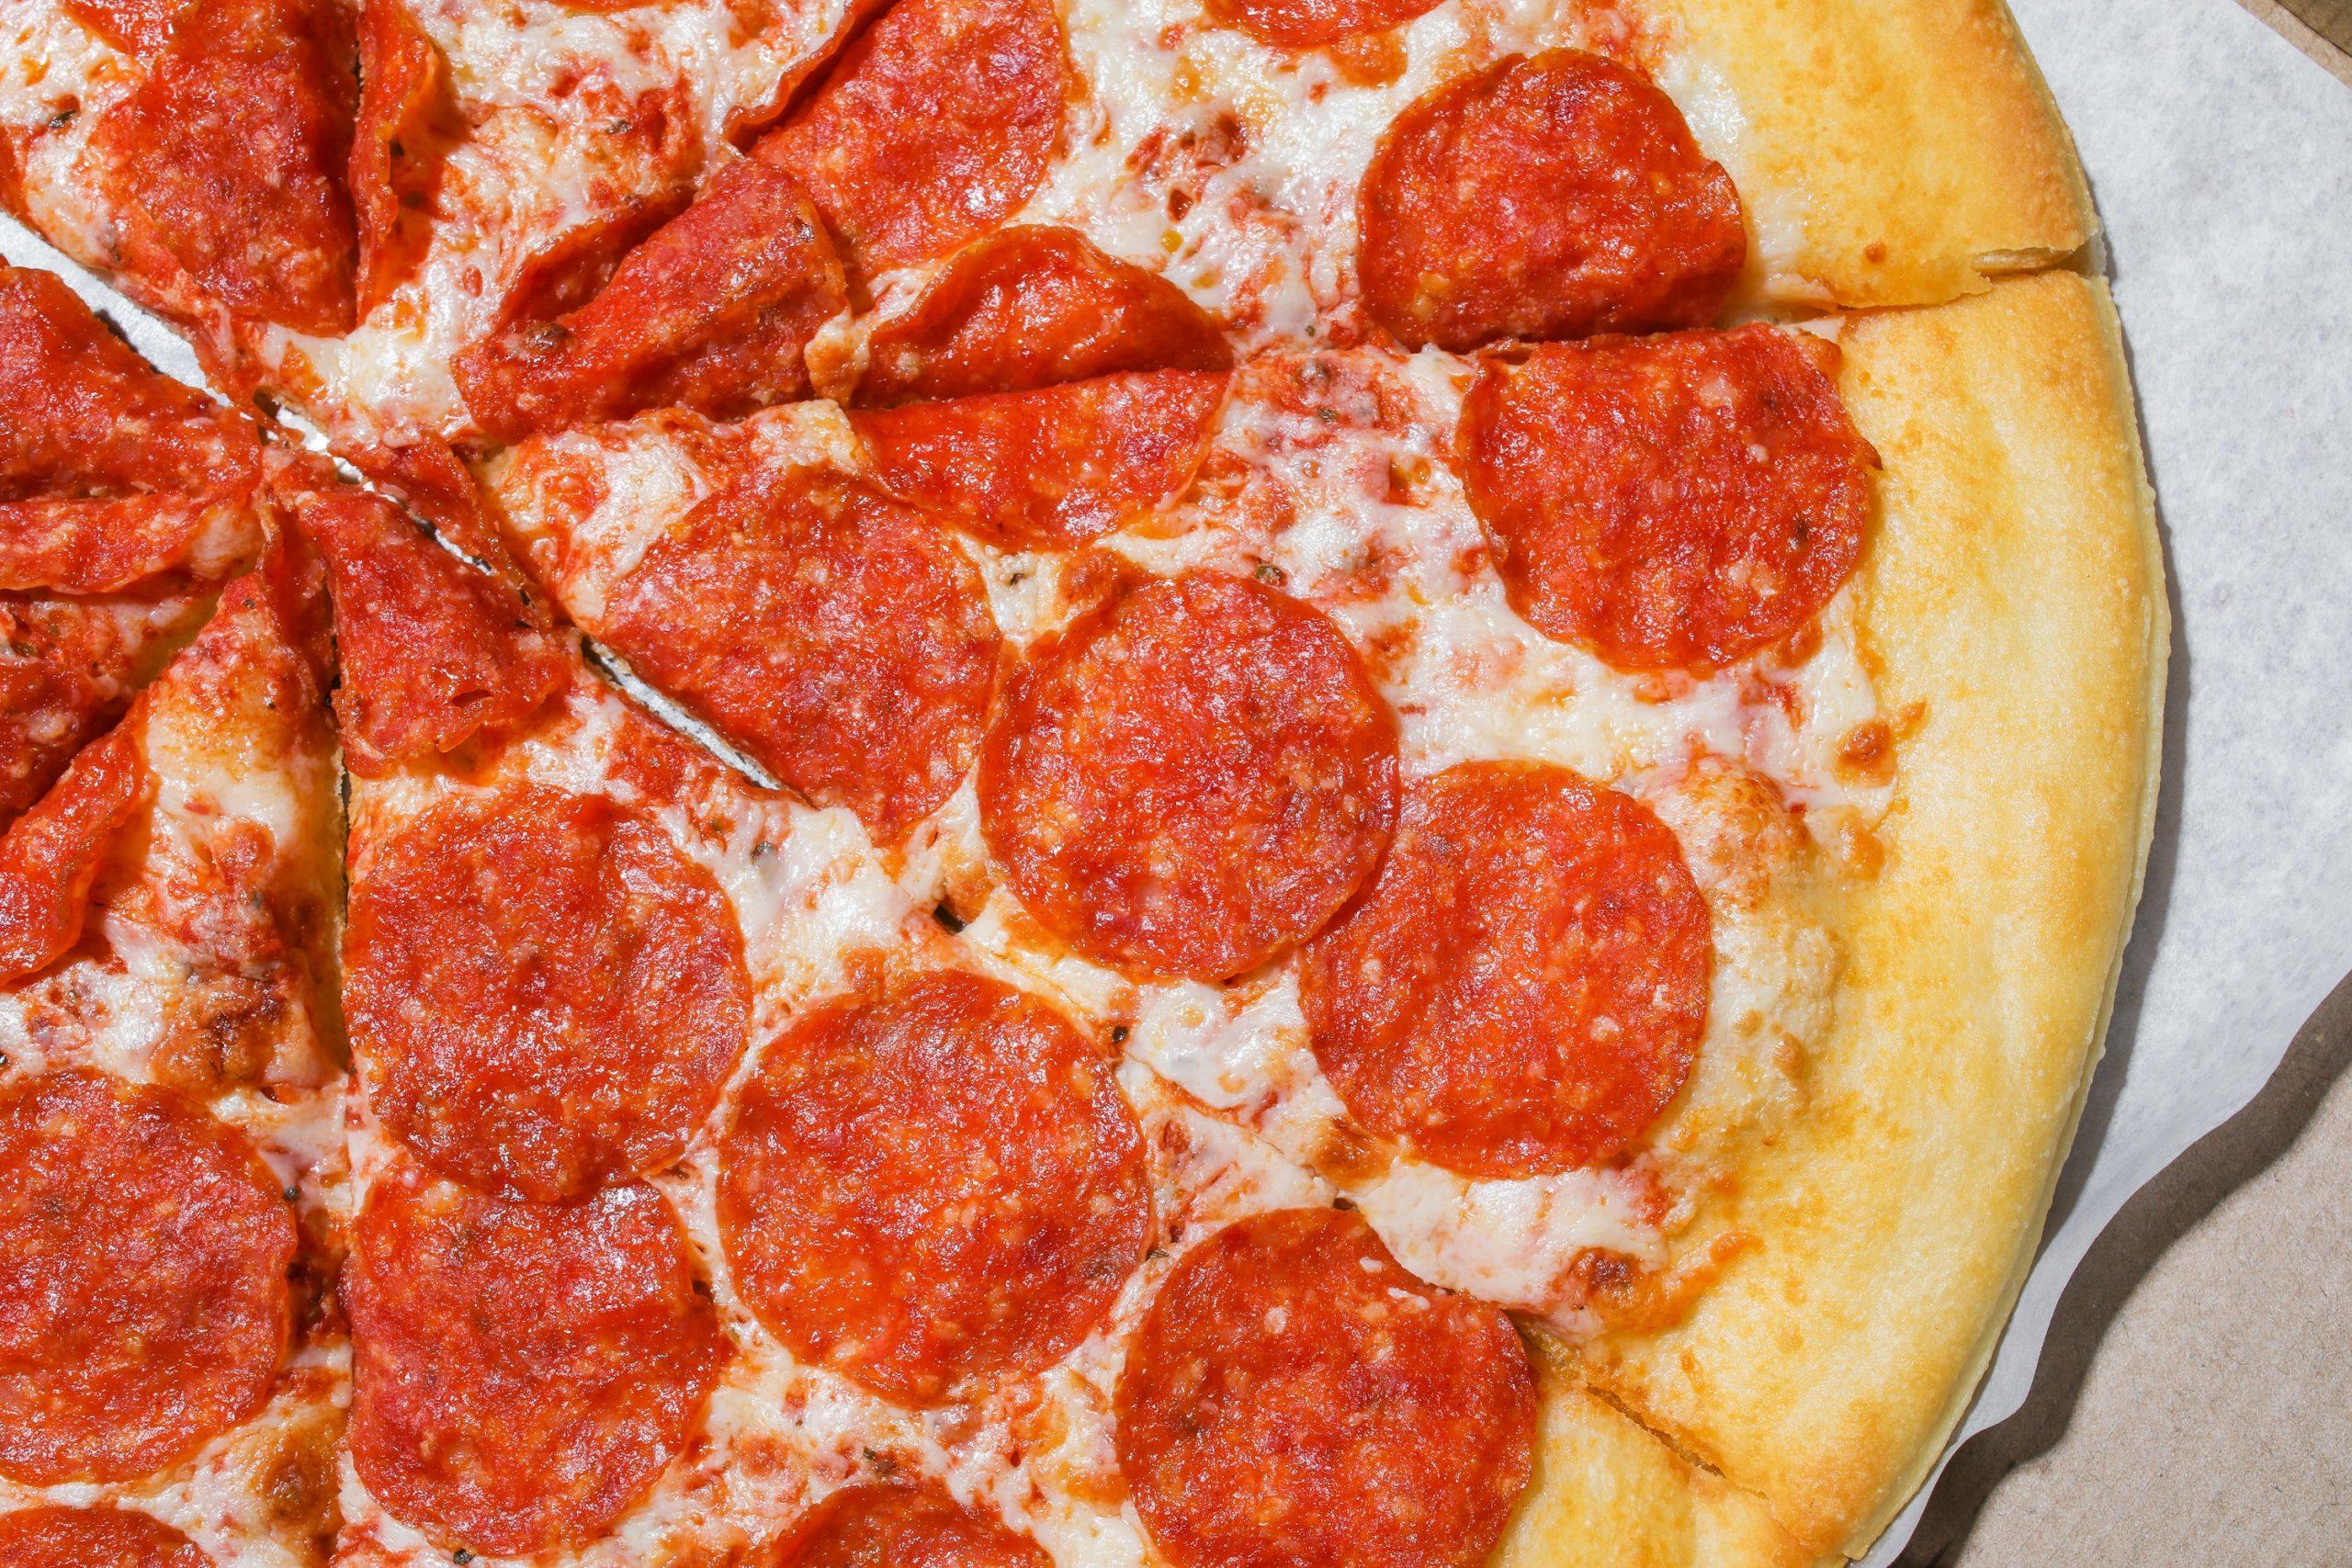 Two inmates doing time for murder at a prison in Sweden took a pair of guards hostage and released them after receiving the pizza they had demanded in return. Photo: Pexels